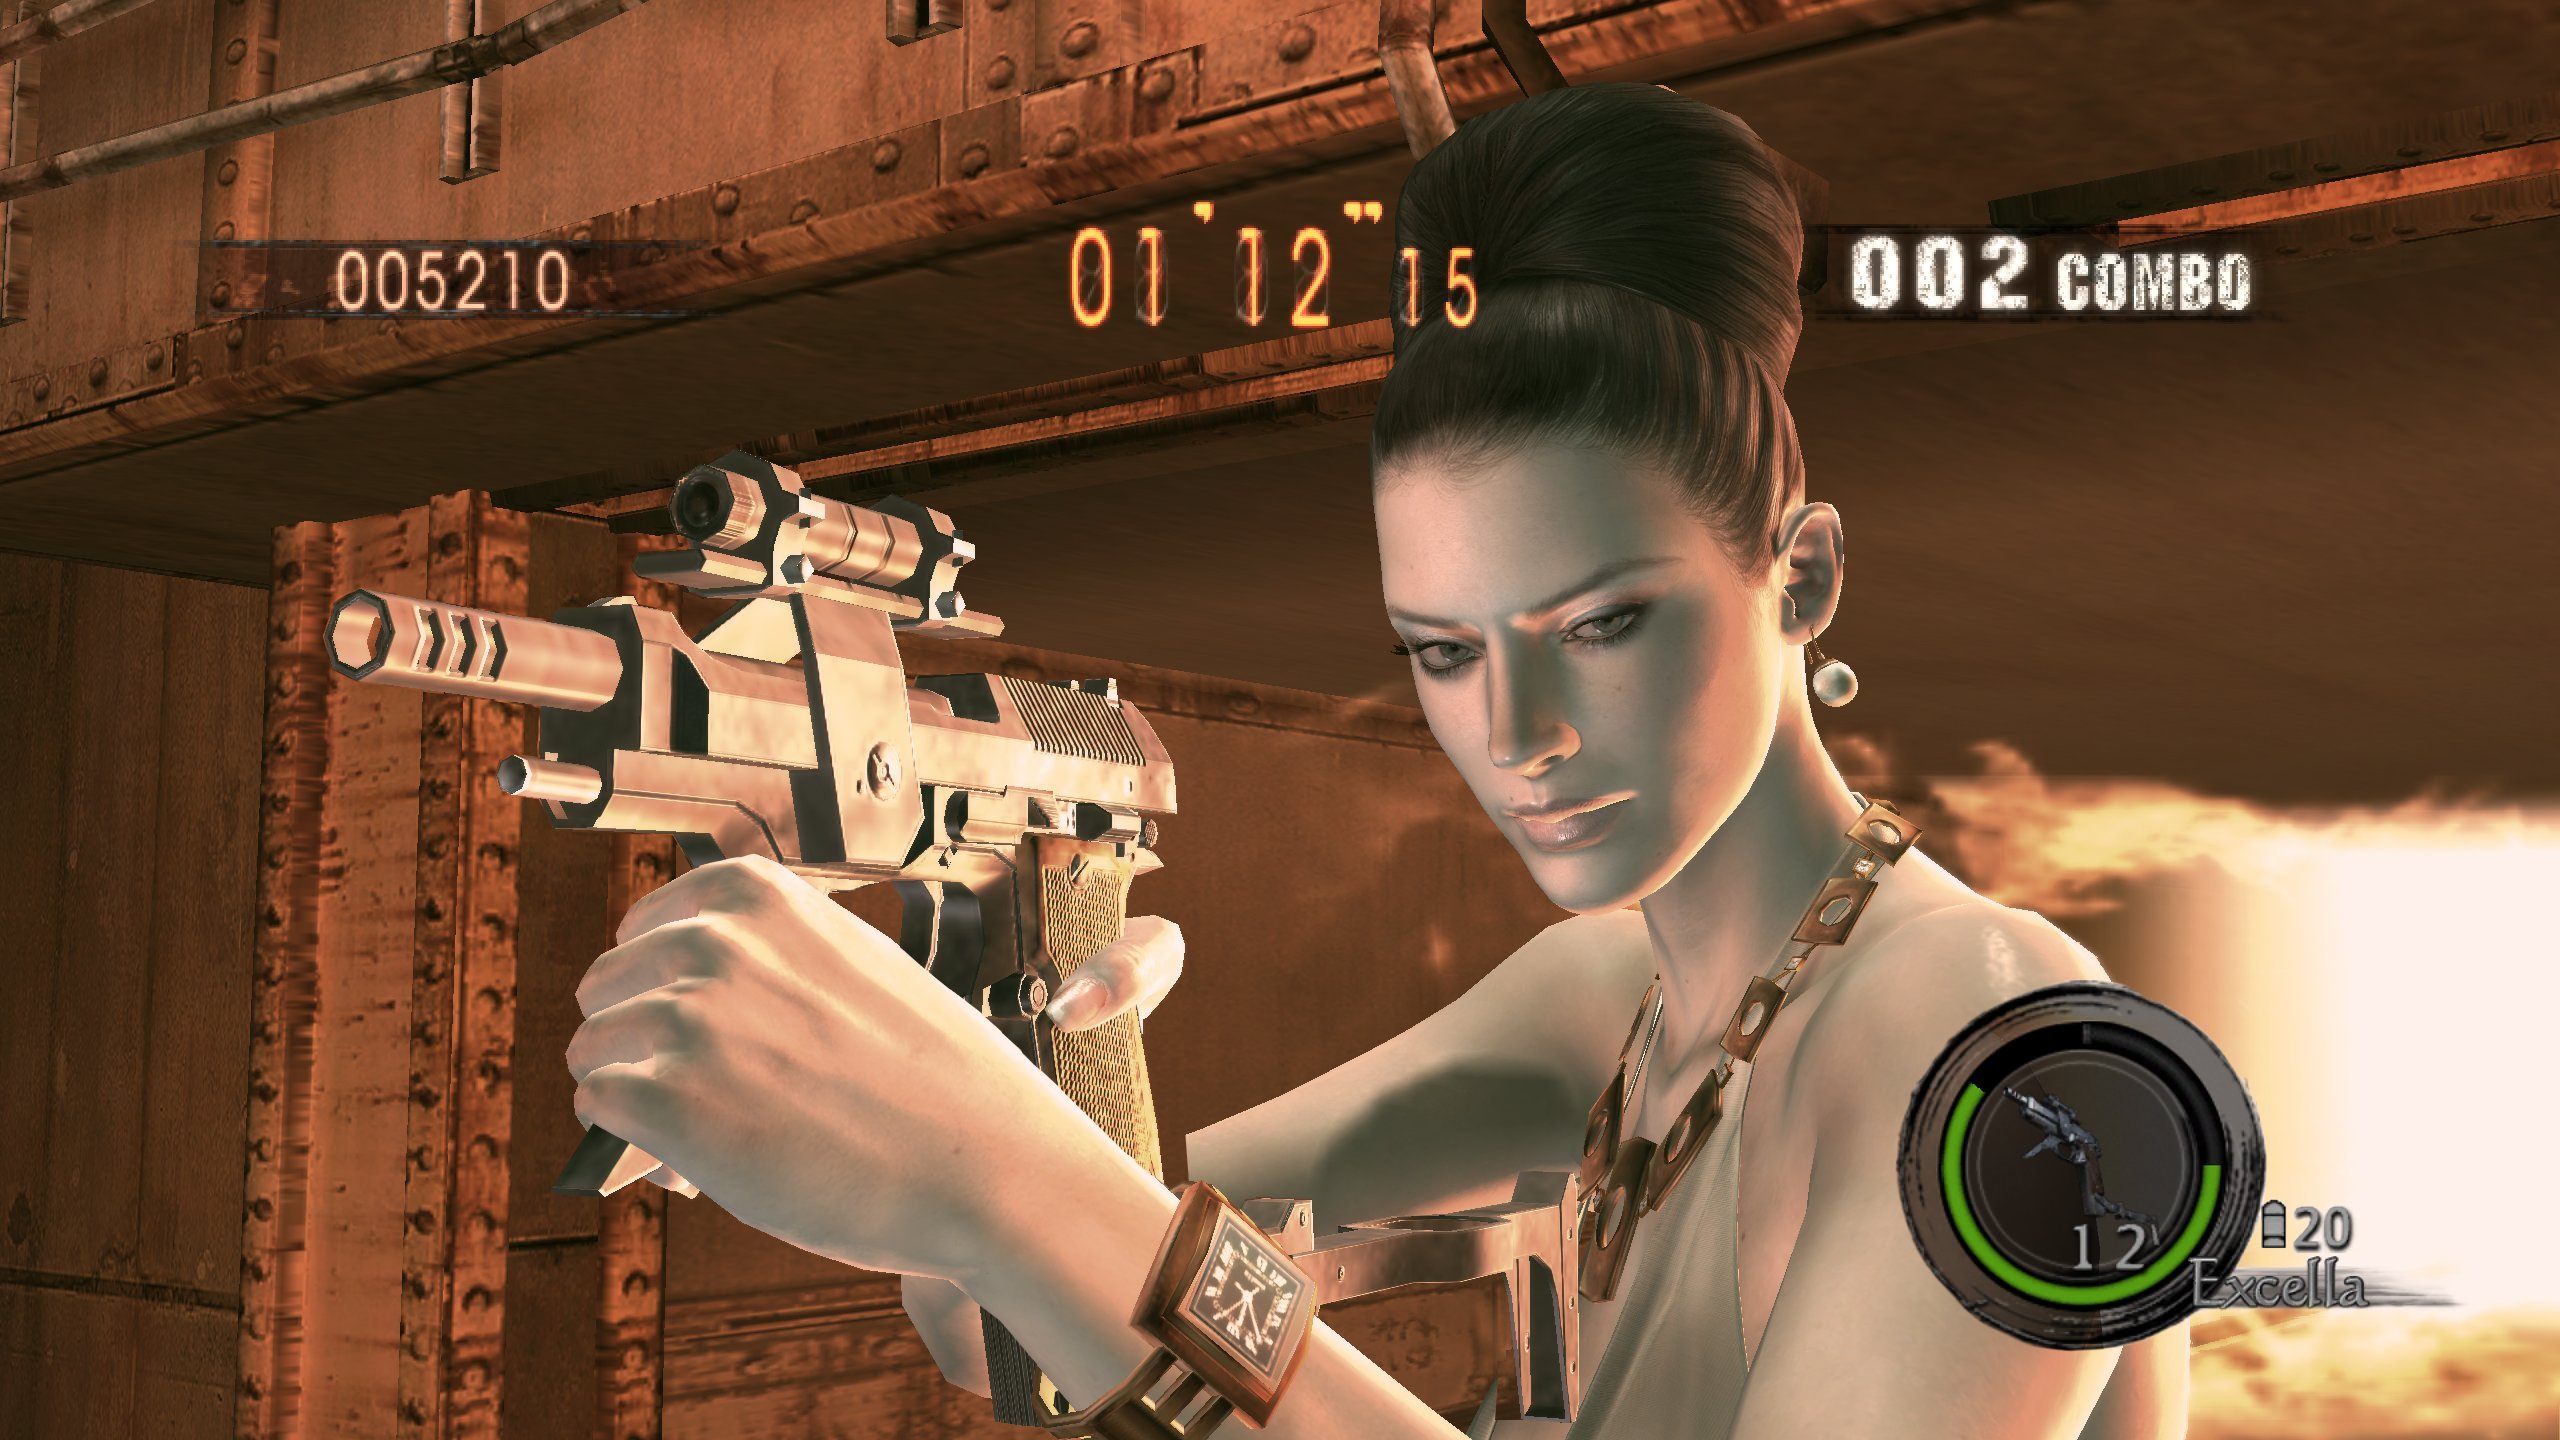 Excella playable in Resident Evil 5 mercs reunion - Gematsu